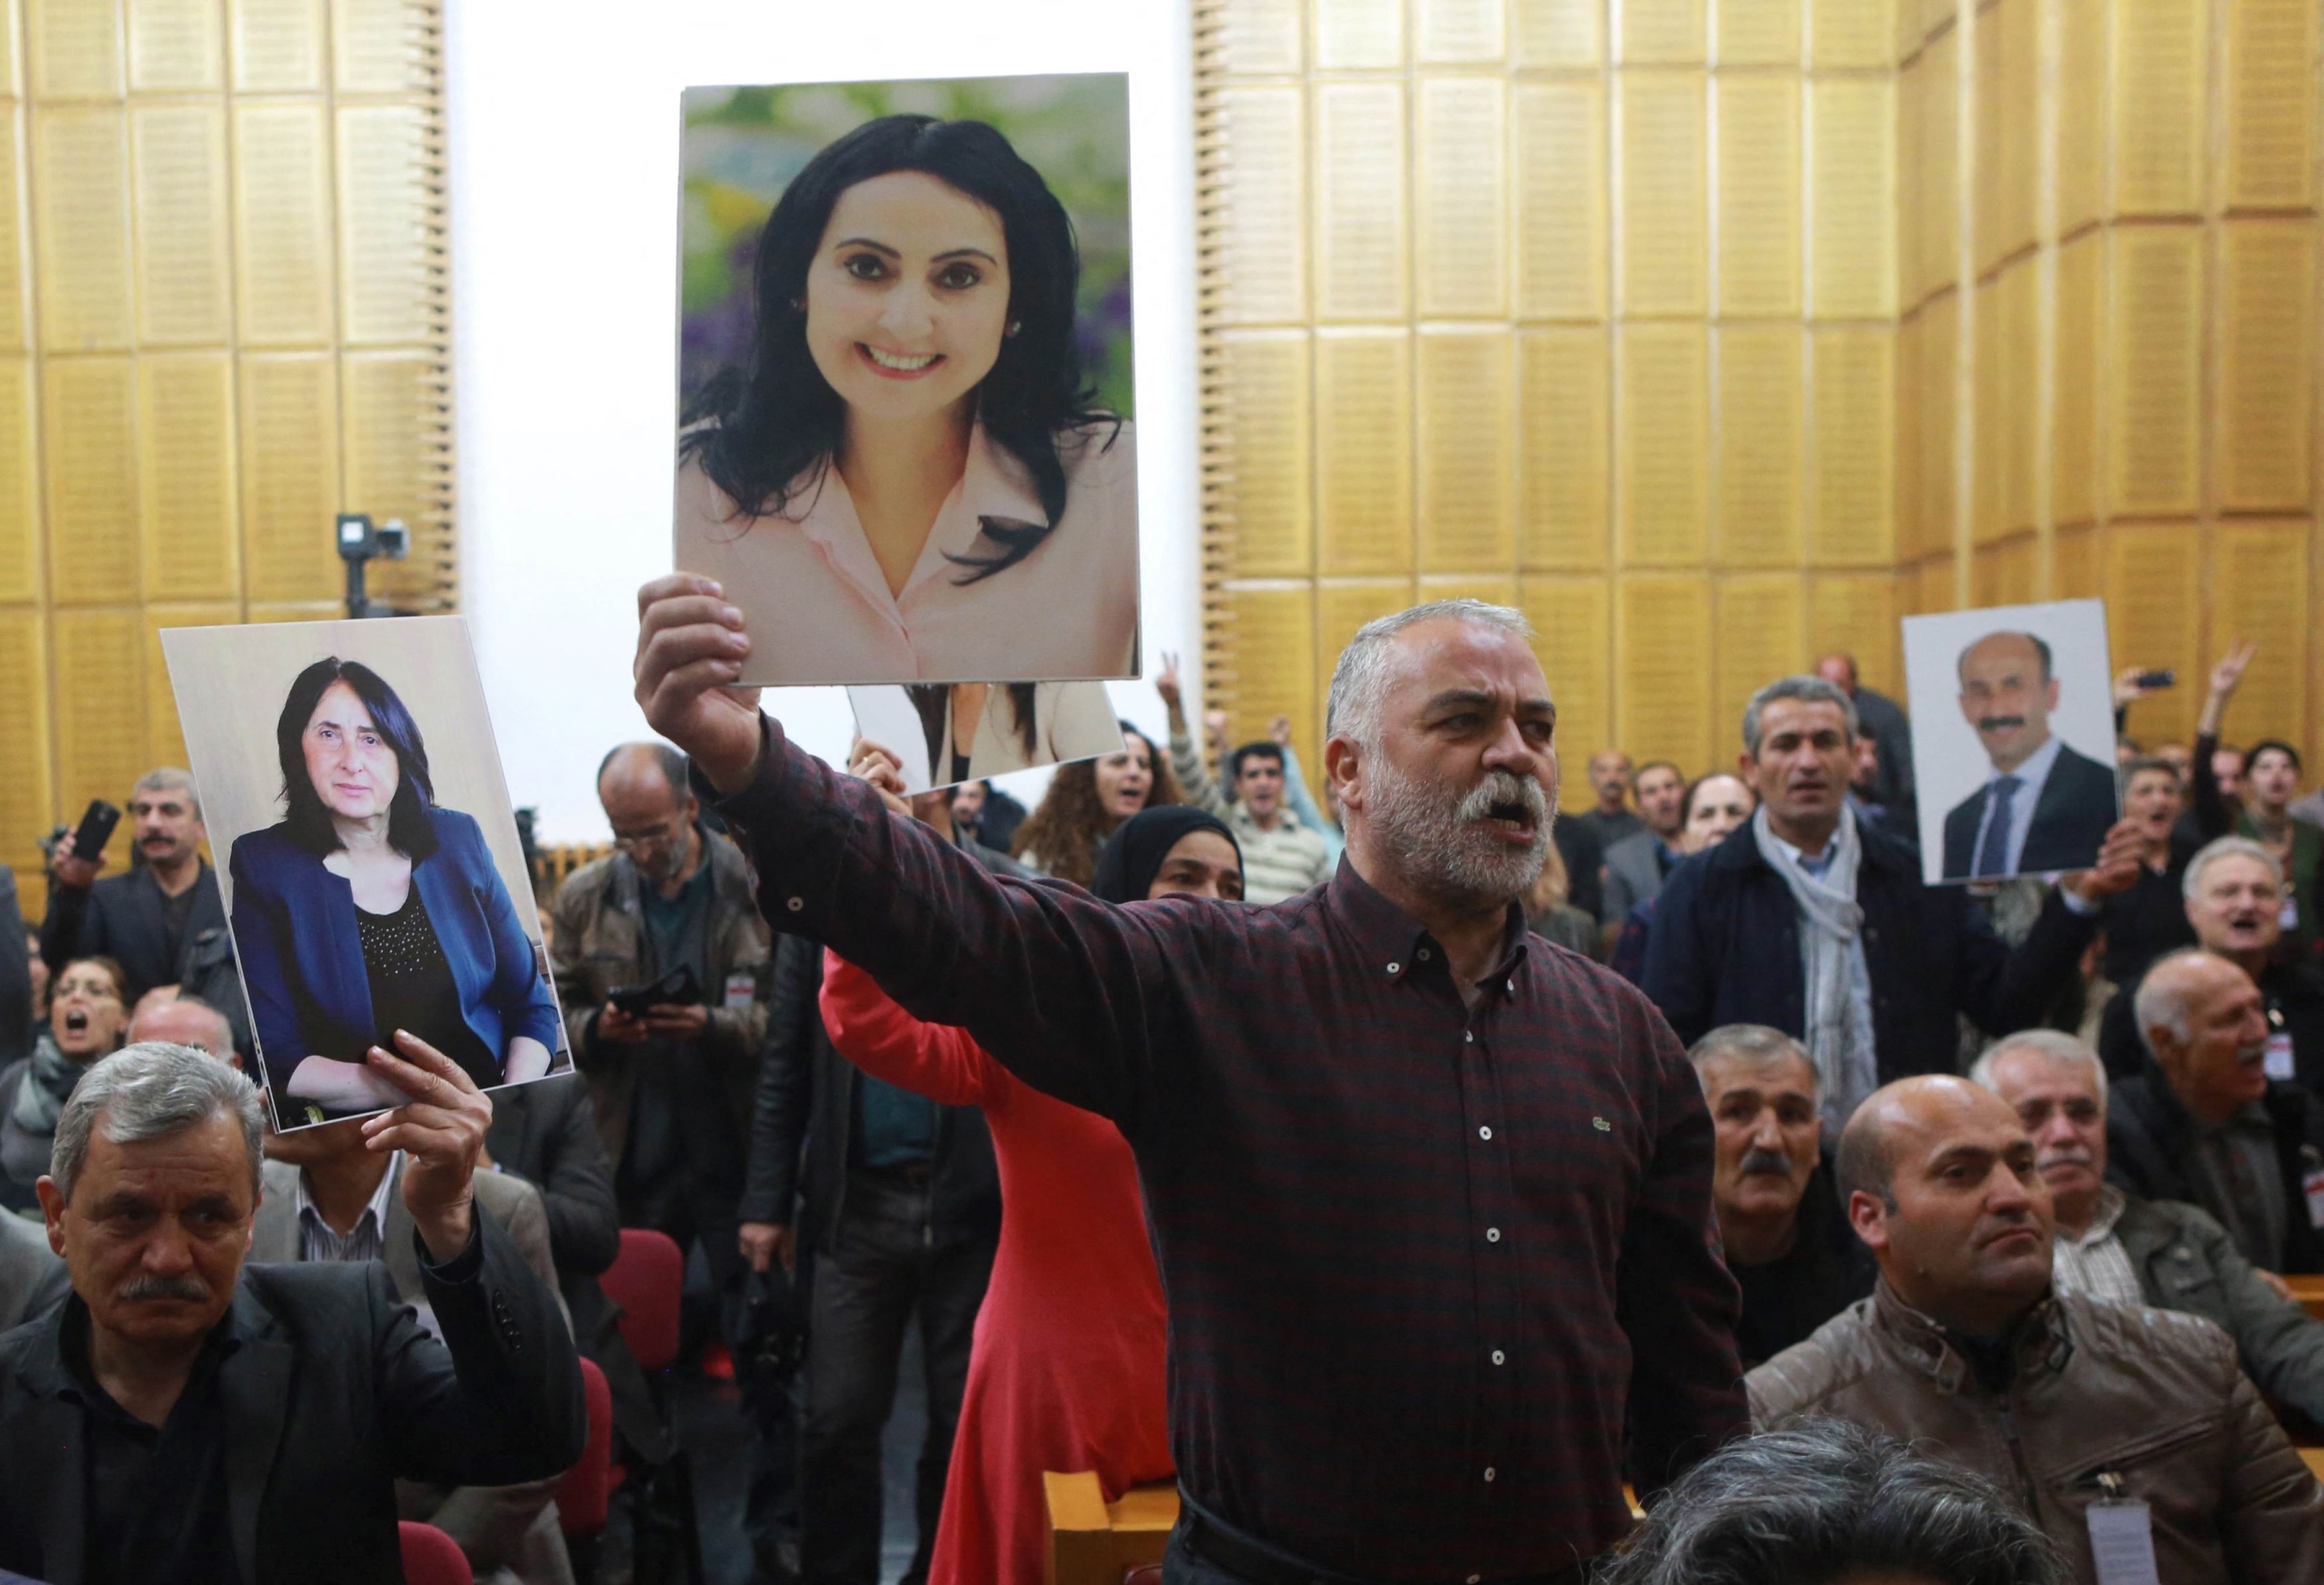 A supporter holds a portrait of Figen Yuksekdag, detained co-leader of Turkey's pro-Kurdish opposition Peoples' Democratic Party (HDP) at a meeting at the Turkish parliament in Ankara, on November 8, 2016 (AFP)